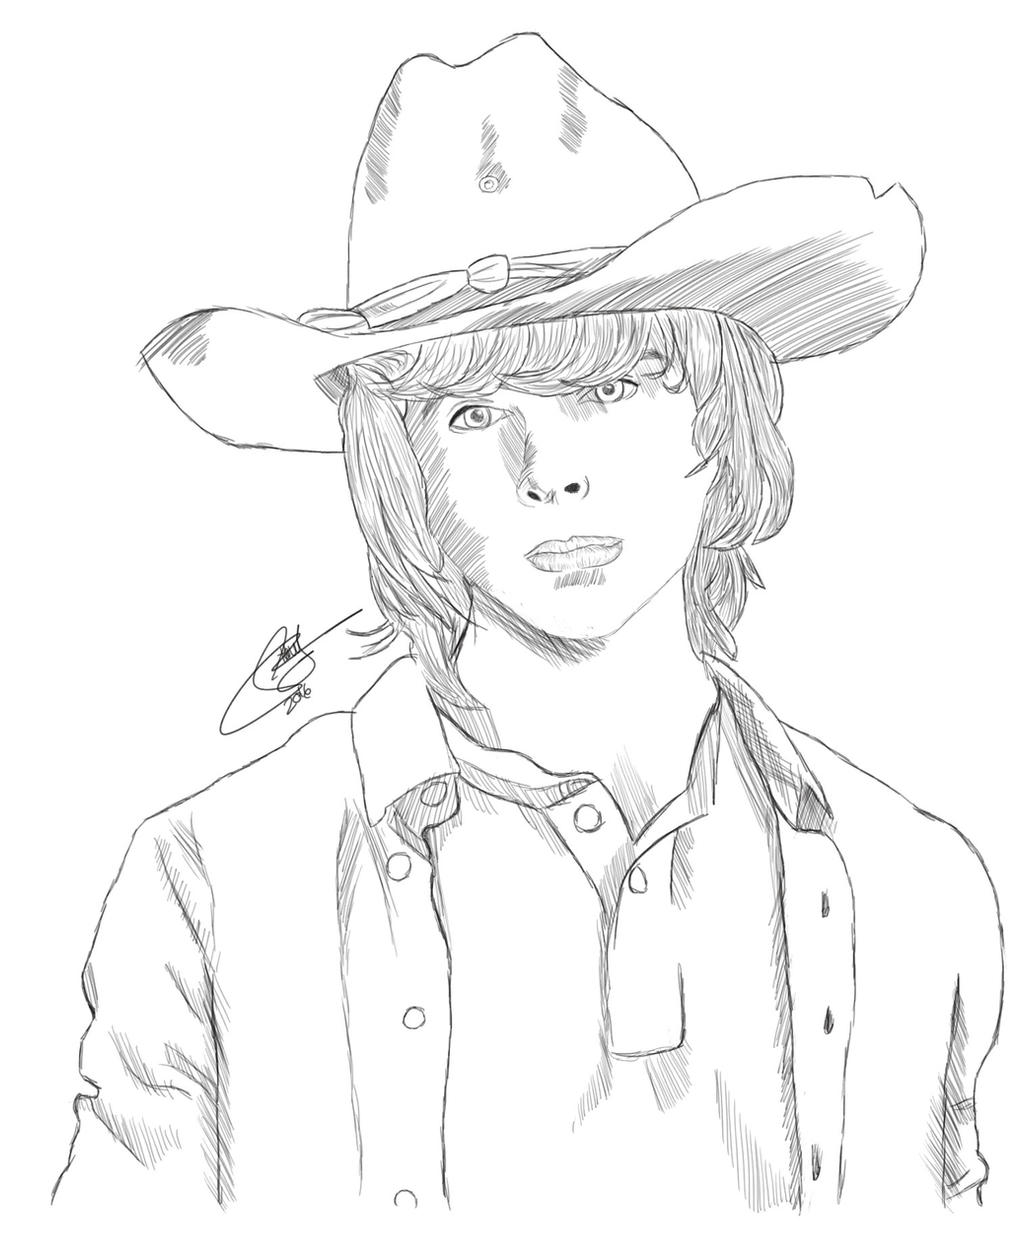 Carl grimes from the walking dead by tabeasusan on